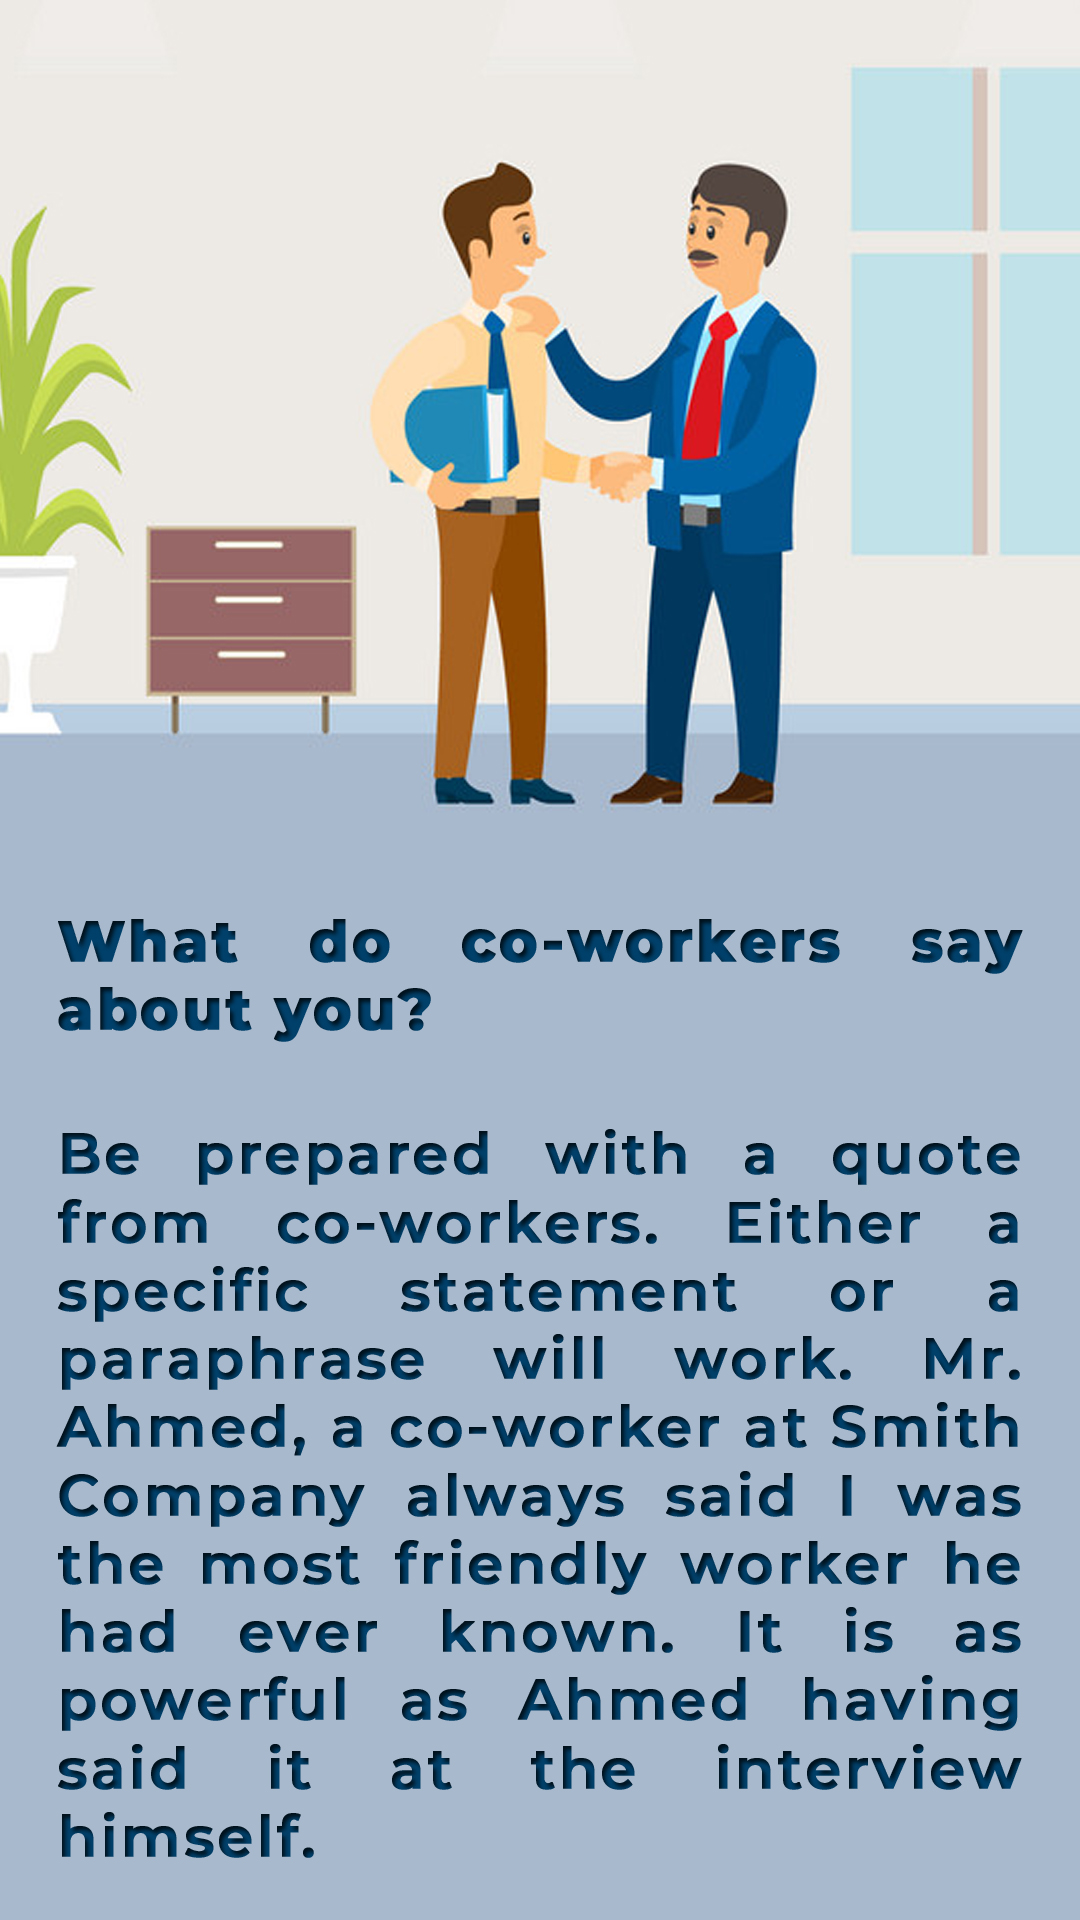 What do co-workers say about you?